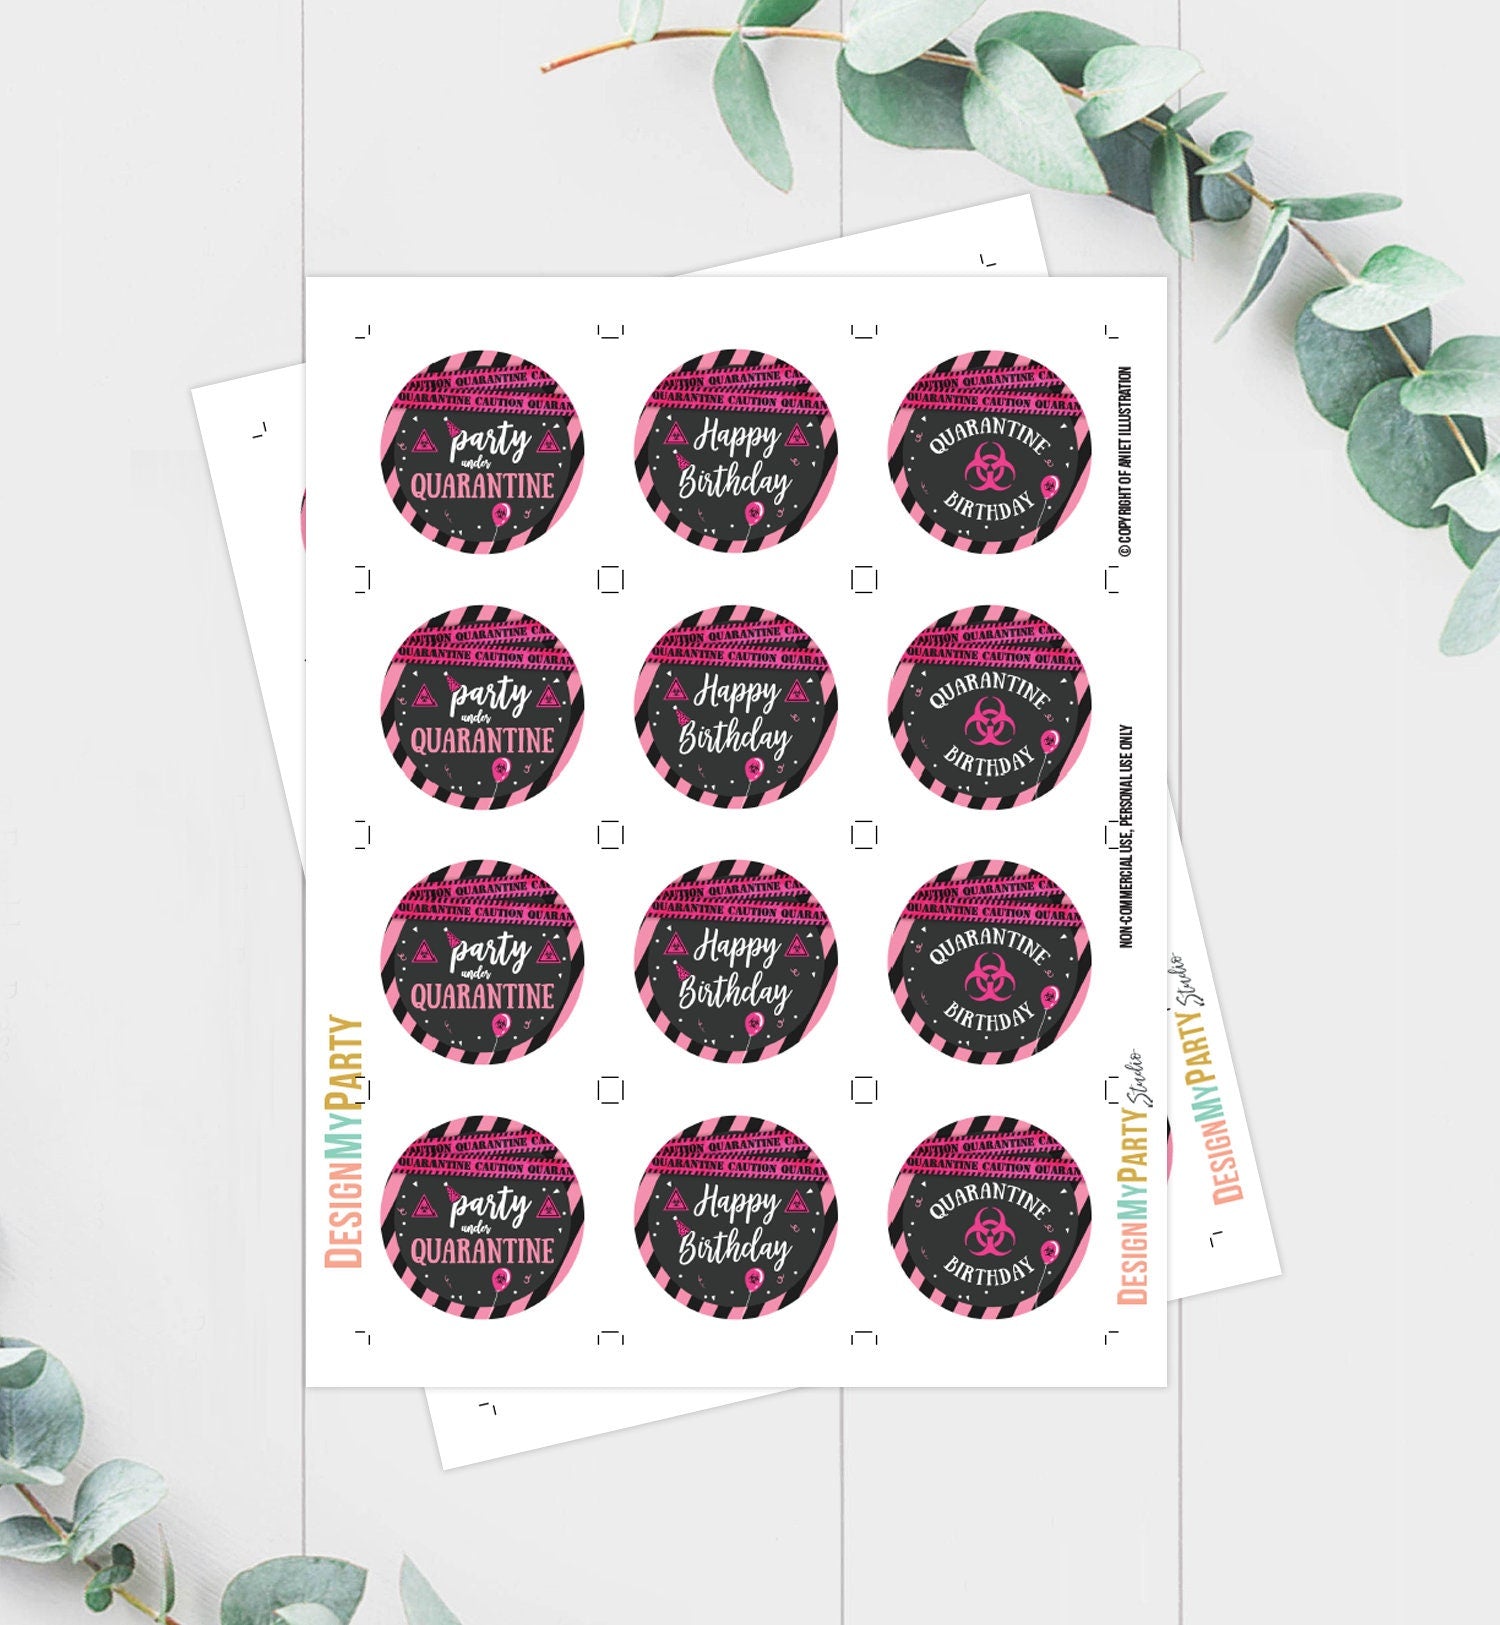 Quarantine Cupcake Toppers Favor Tags Birthday Party Pink Social Distancing Drive By Through No One Invited Download Digital PRINTABLE 0334